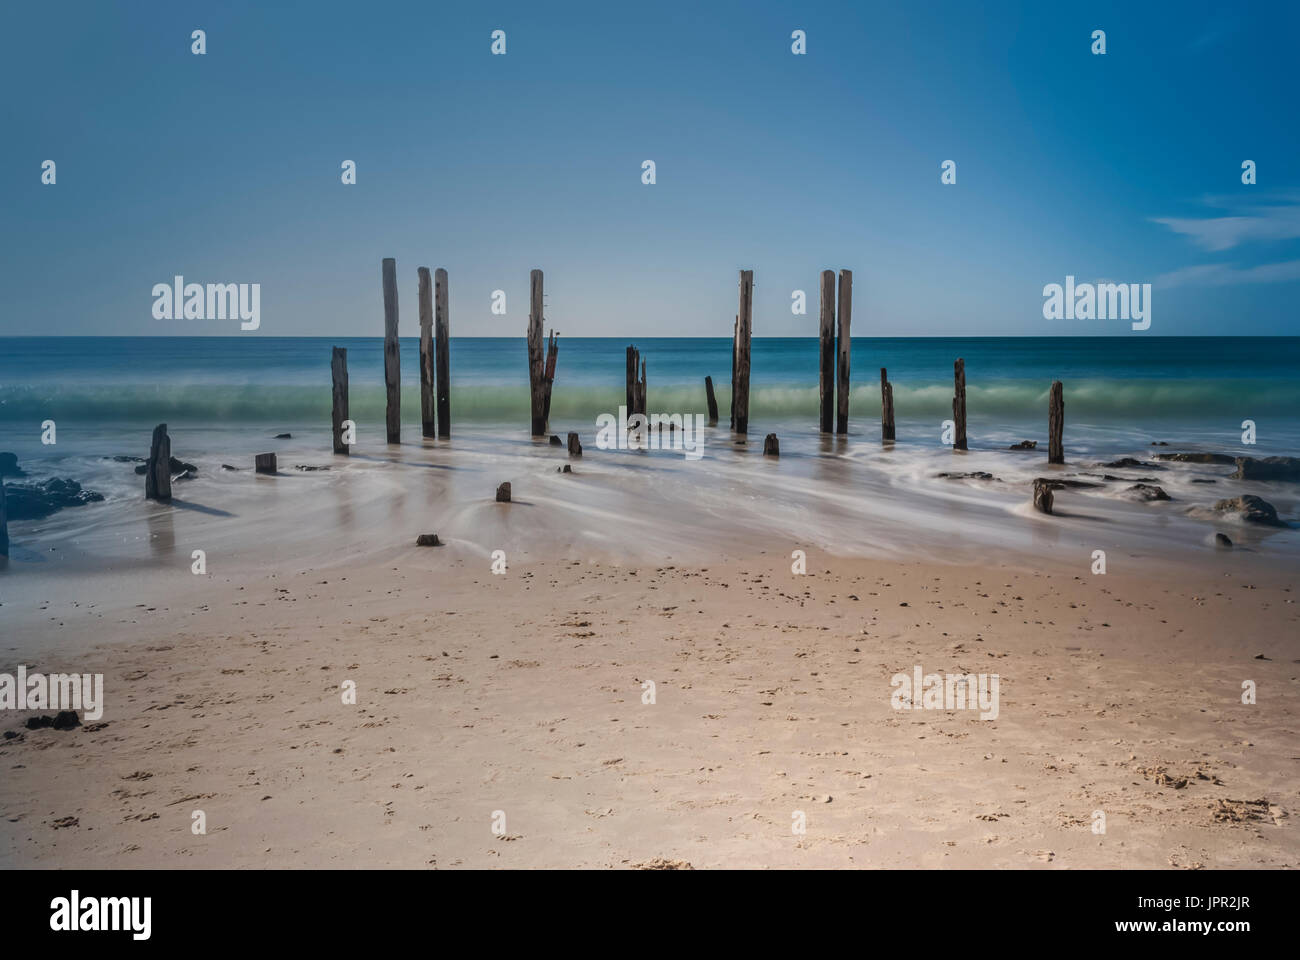 A day time image of the historic old jetty ruins at Port Willunga Beach, South Australia using long exposure giving the scene a soft dreamy feel to it Stock Photo